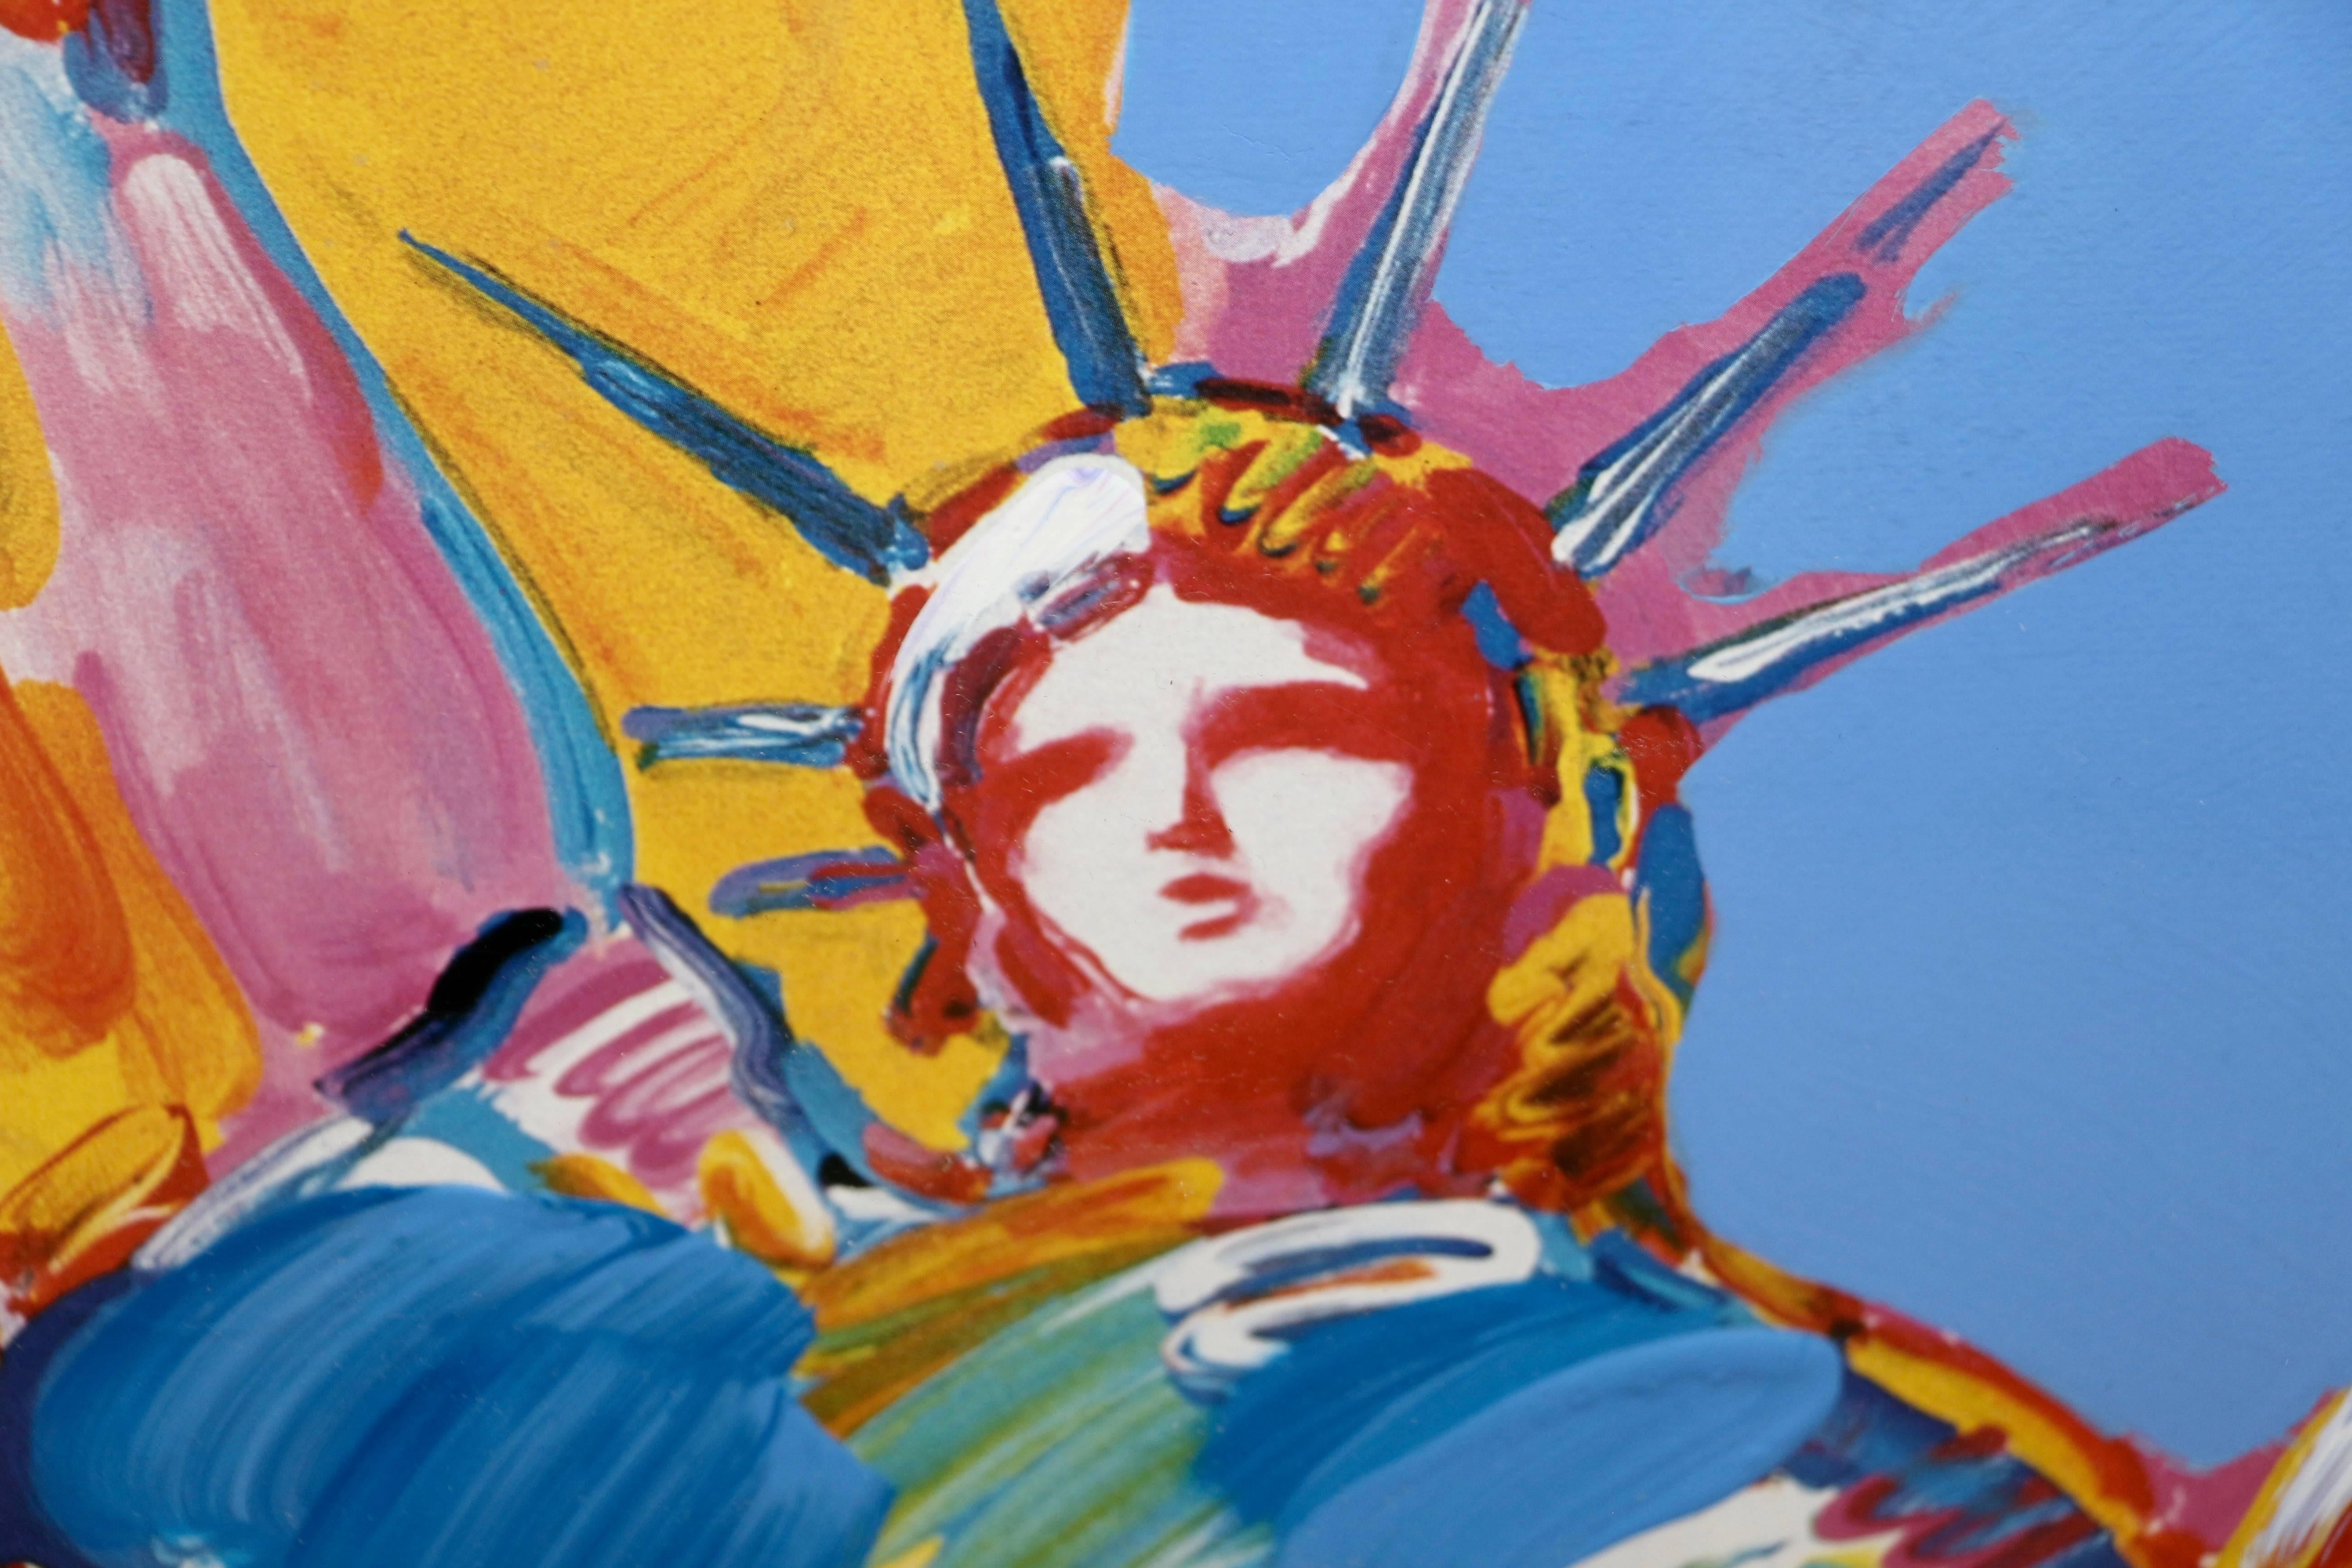 A unique work of art by Peter Max out of his Statue of Liberty series from 2001. This is a Mixed Media with Acrylic painting and color lithography on paper. It is signed upper right in acrylic. Beautifully framed. The black mesh back has some dust